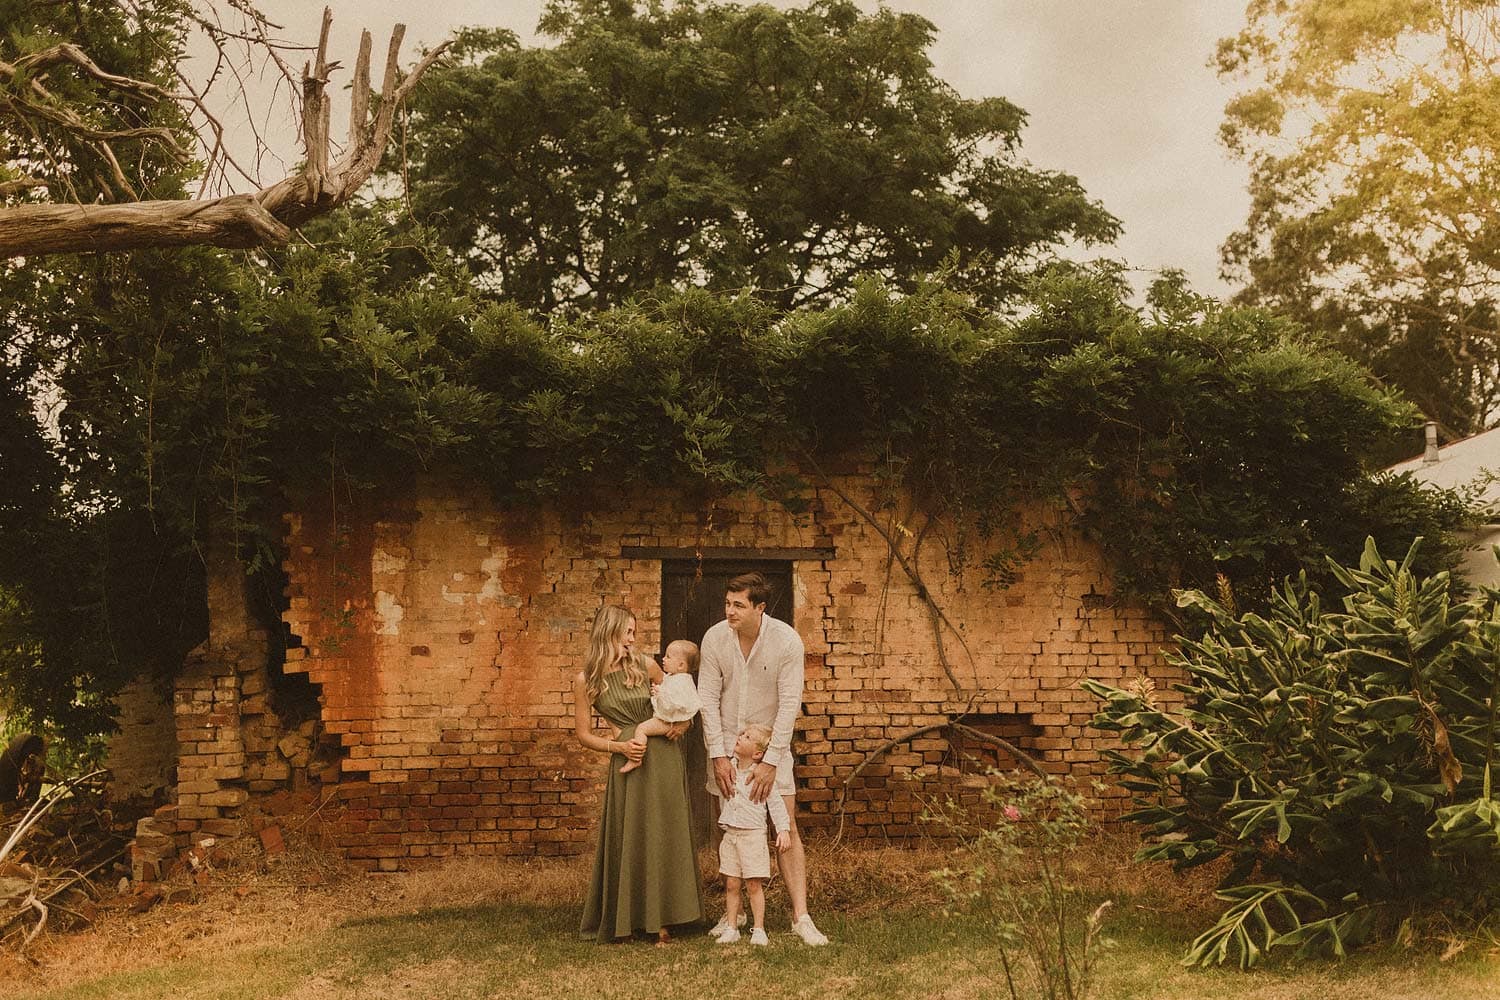 Sydney-family-photographer-family-infront-of-old-brick-buildong-that-is-starting-to-fall-down-mum-talking-to-baby